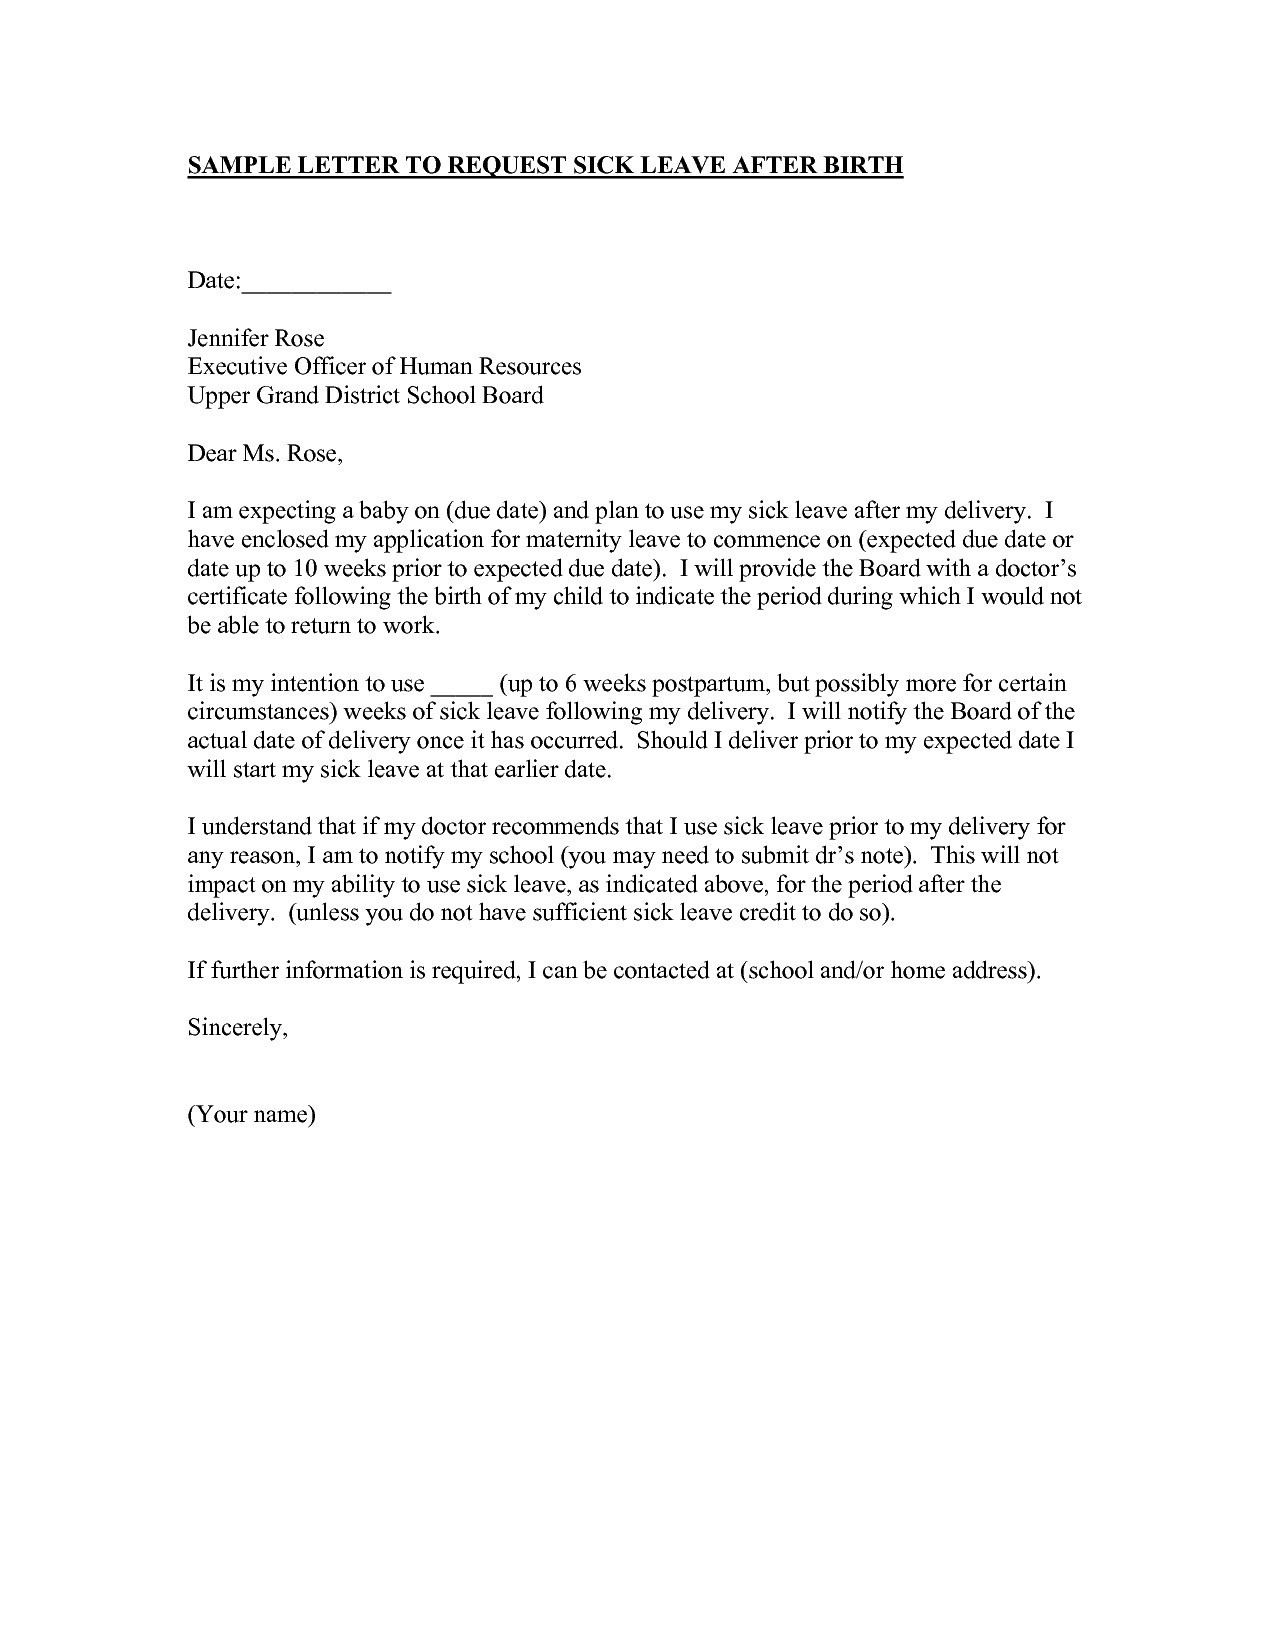 personal-leave-of-absence-letter-template-collection-maternity